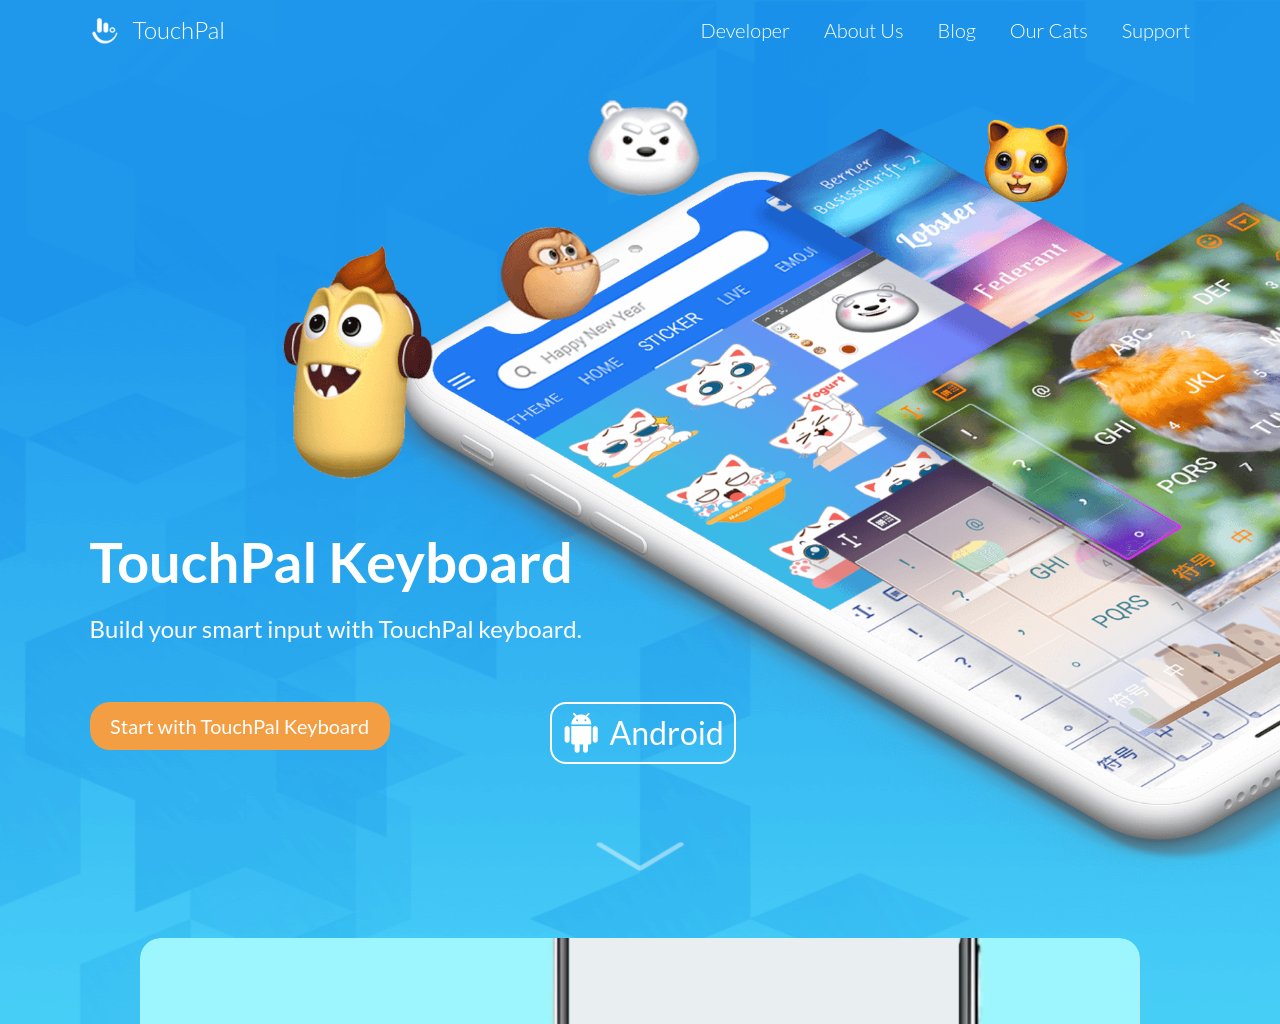 touchpal.com